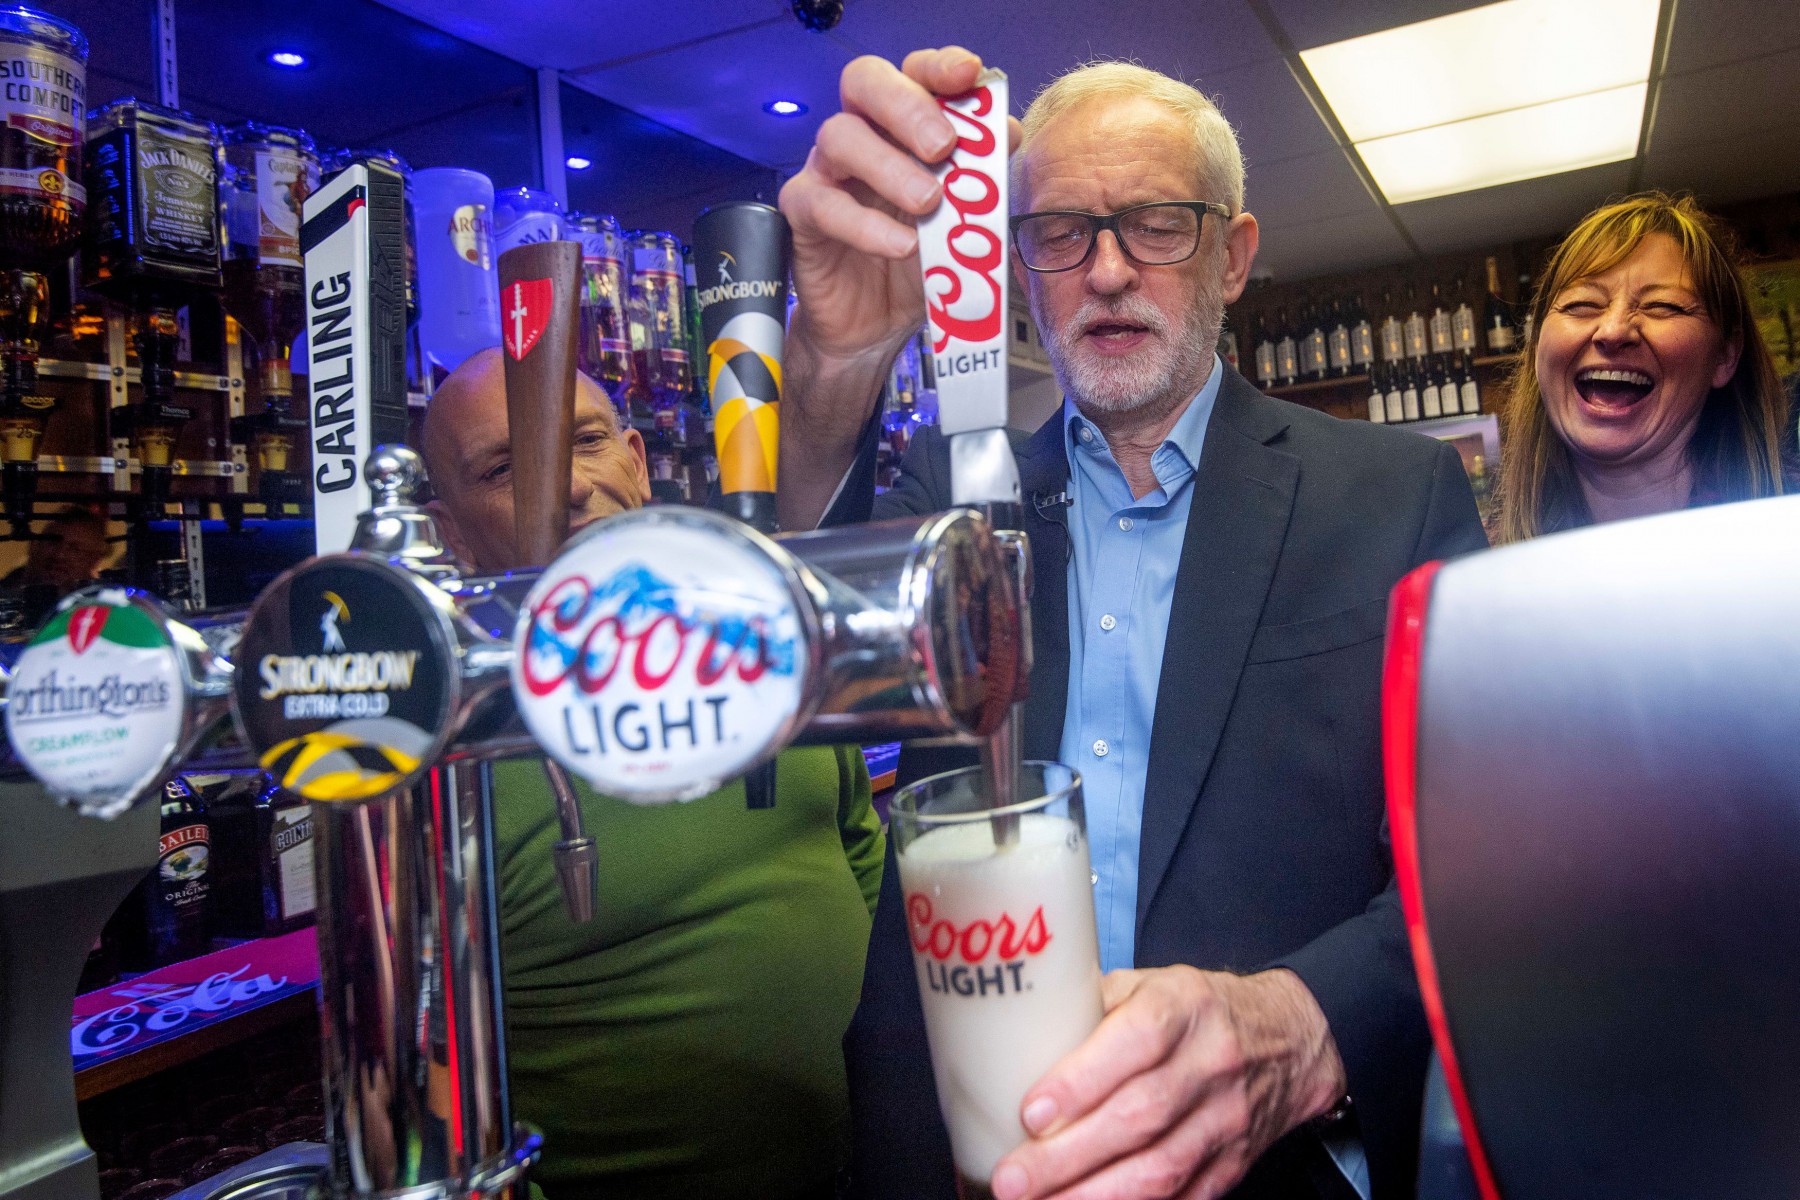 A hung Parliament would likely lead to Jeremy Corbyn in Downing Street